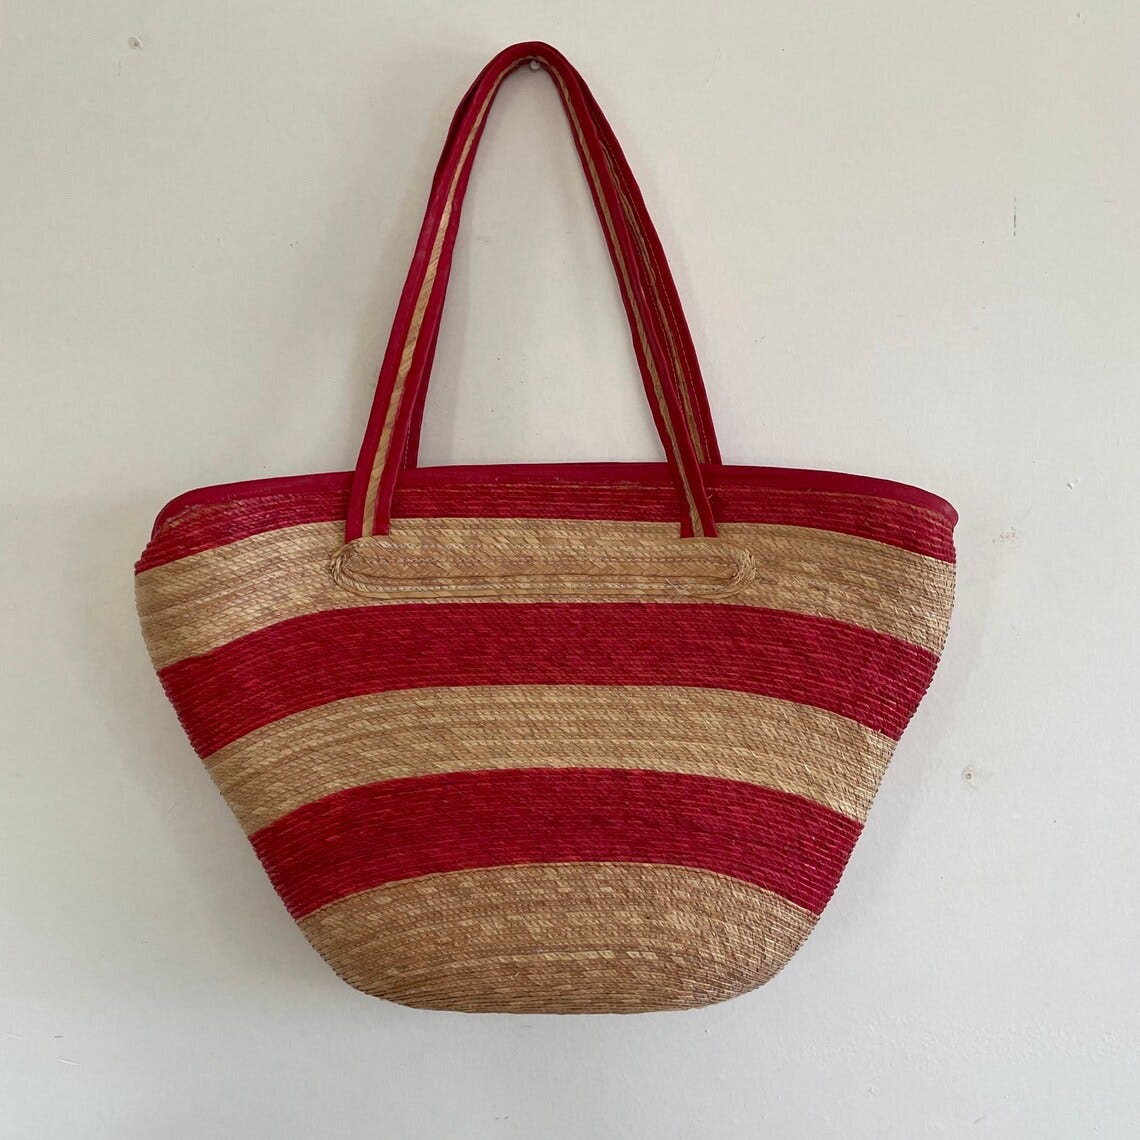 Vintage Tan and Red Striped Shoulder Bag, 1970s Beach Purse image 1